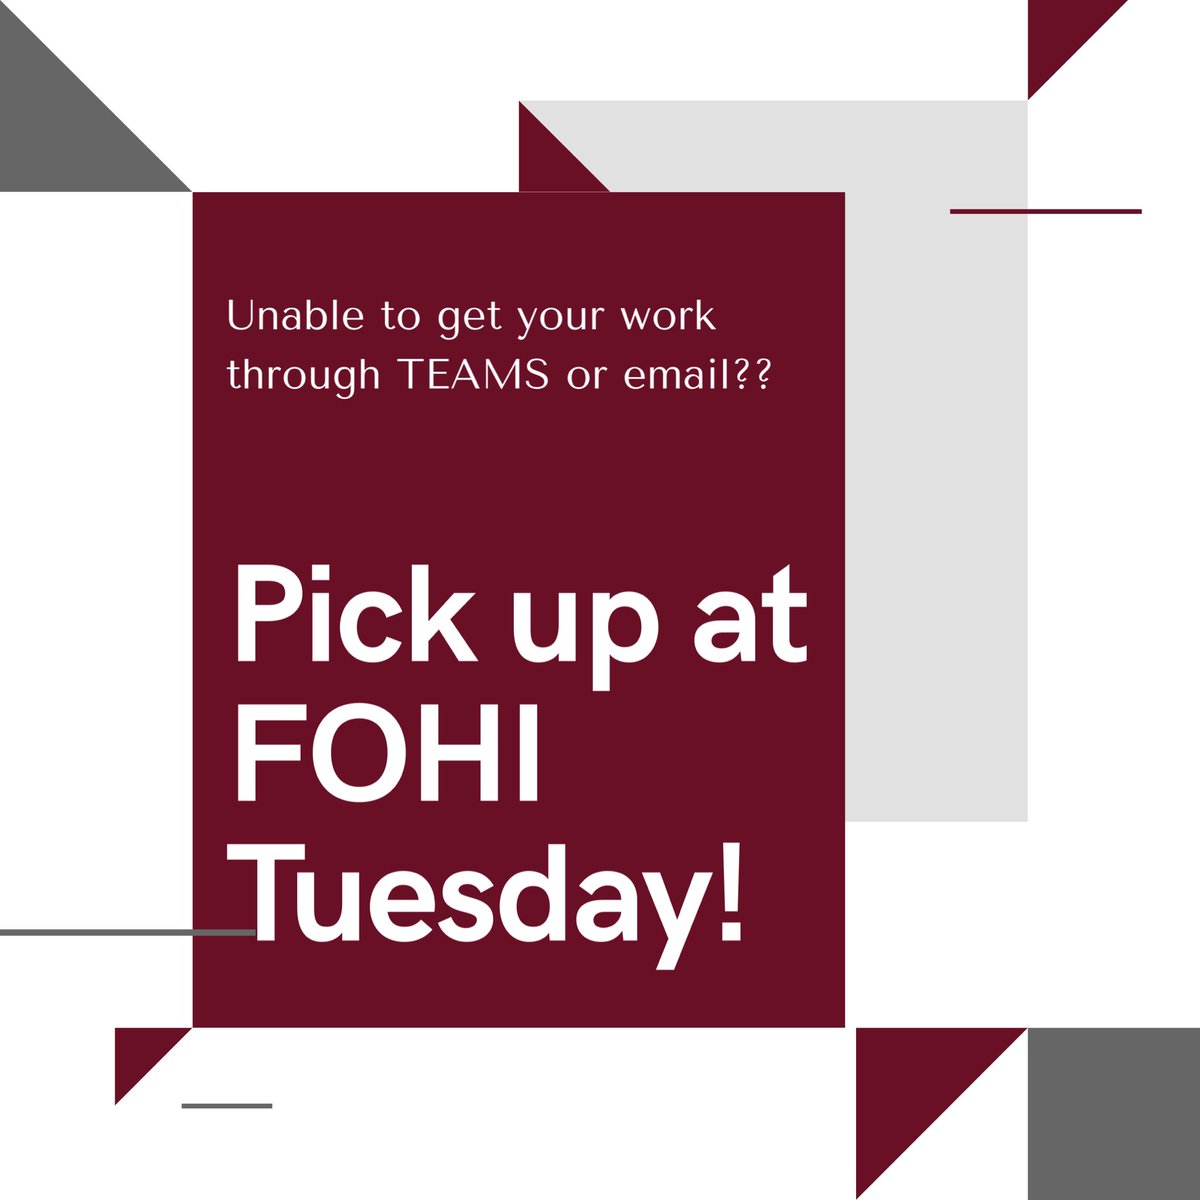 Your Distance Learning grade bump assignments will be LIVE tomorrow on TEAMS or through email!! Need a paper copy?? See you at Fohi Tuesday 4/7 between 8am-noon to pick up the district packet! #makethegrade #livemaroon